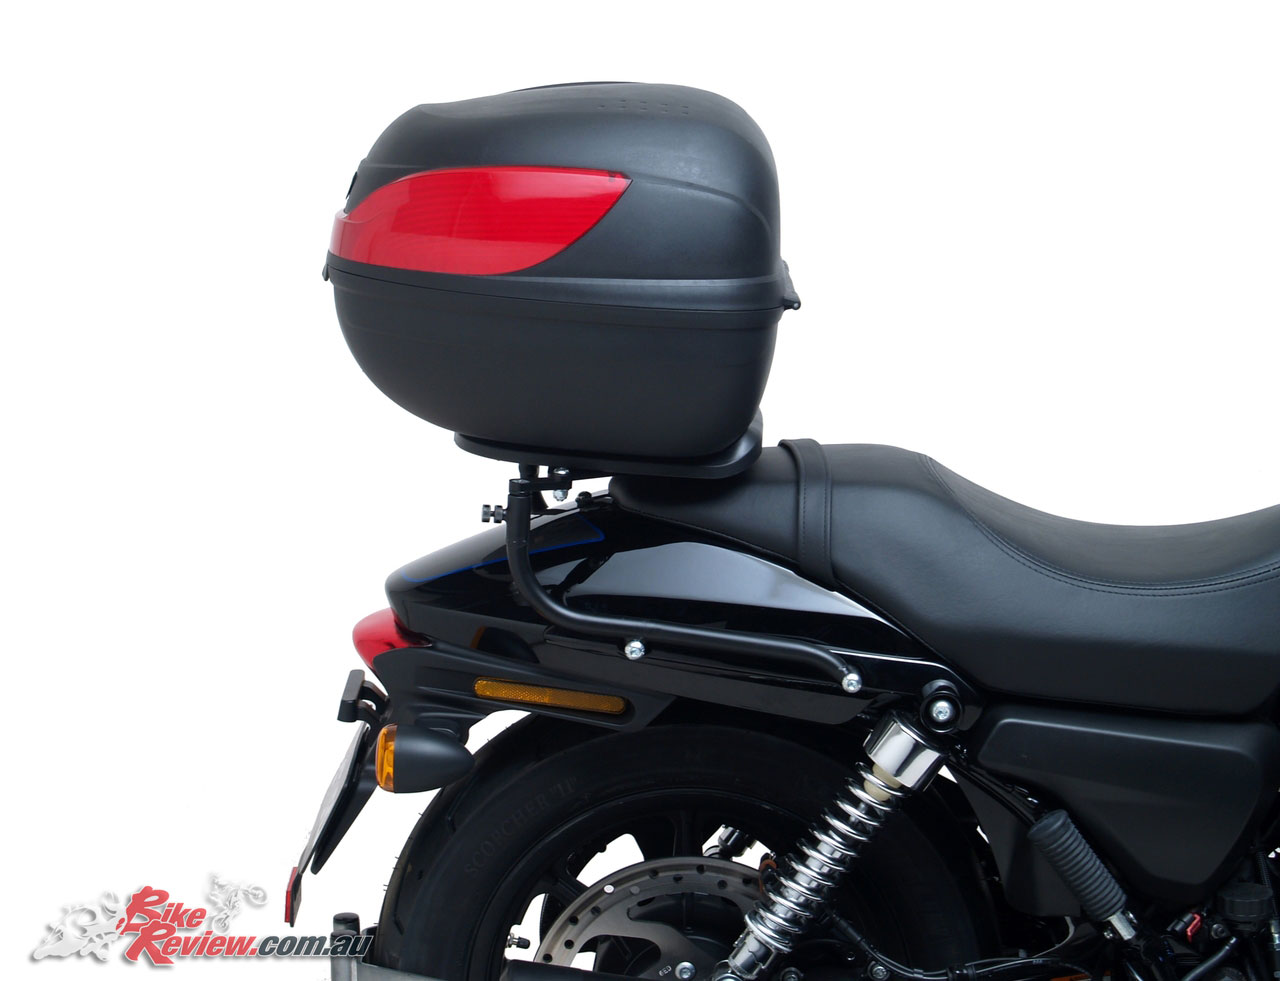 New Product Ventura Available For Harley Street 500 Bike Review